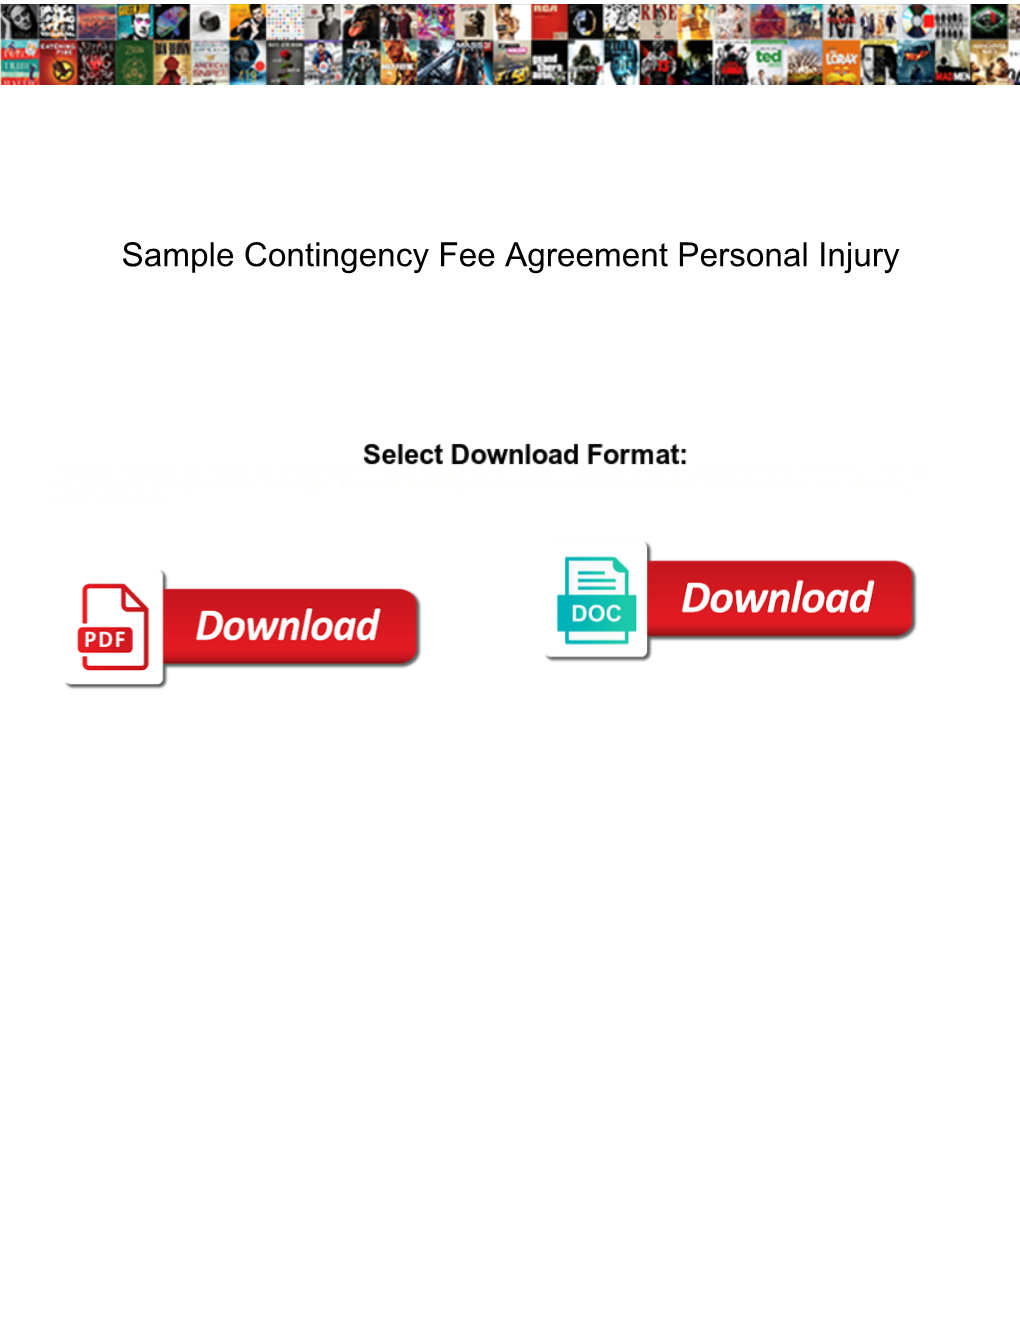 Sample Contingency Fee Agreement Personal Injury